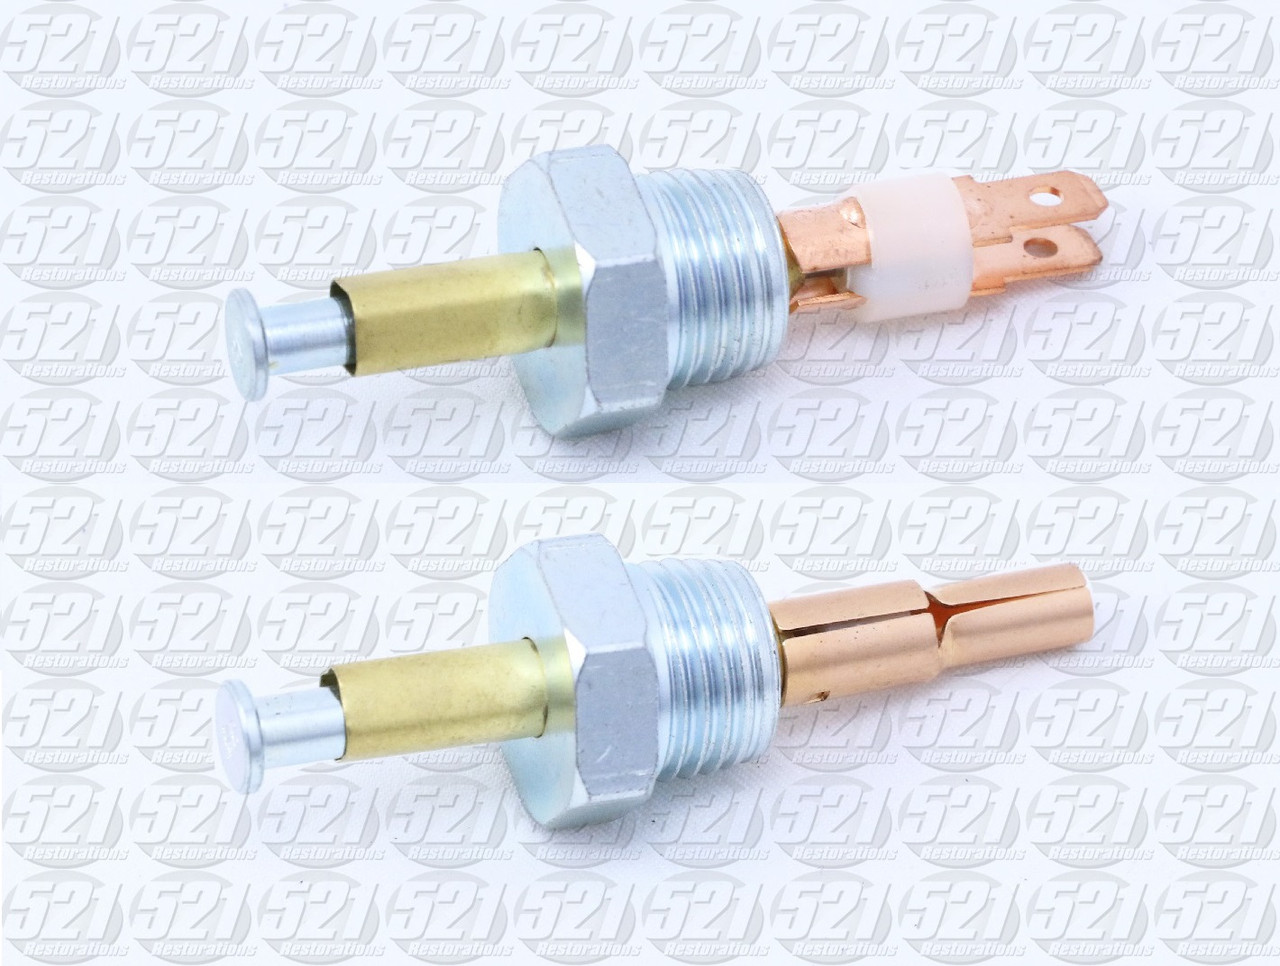 TWO door jamb switches for Mopars (one 2 terminal and one 1 terminal). Larger 1/2-20 thread where the switch takes a 9/16 wrench. Replacement for 3488875 and 2947844.